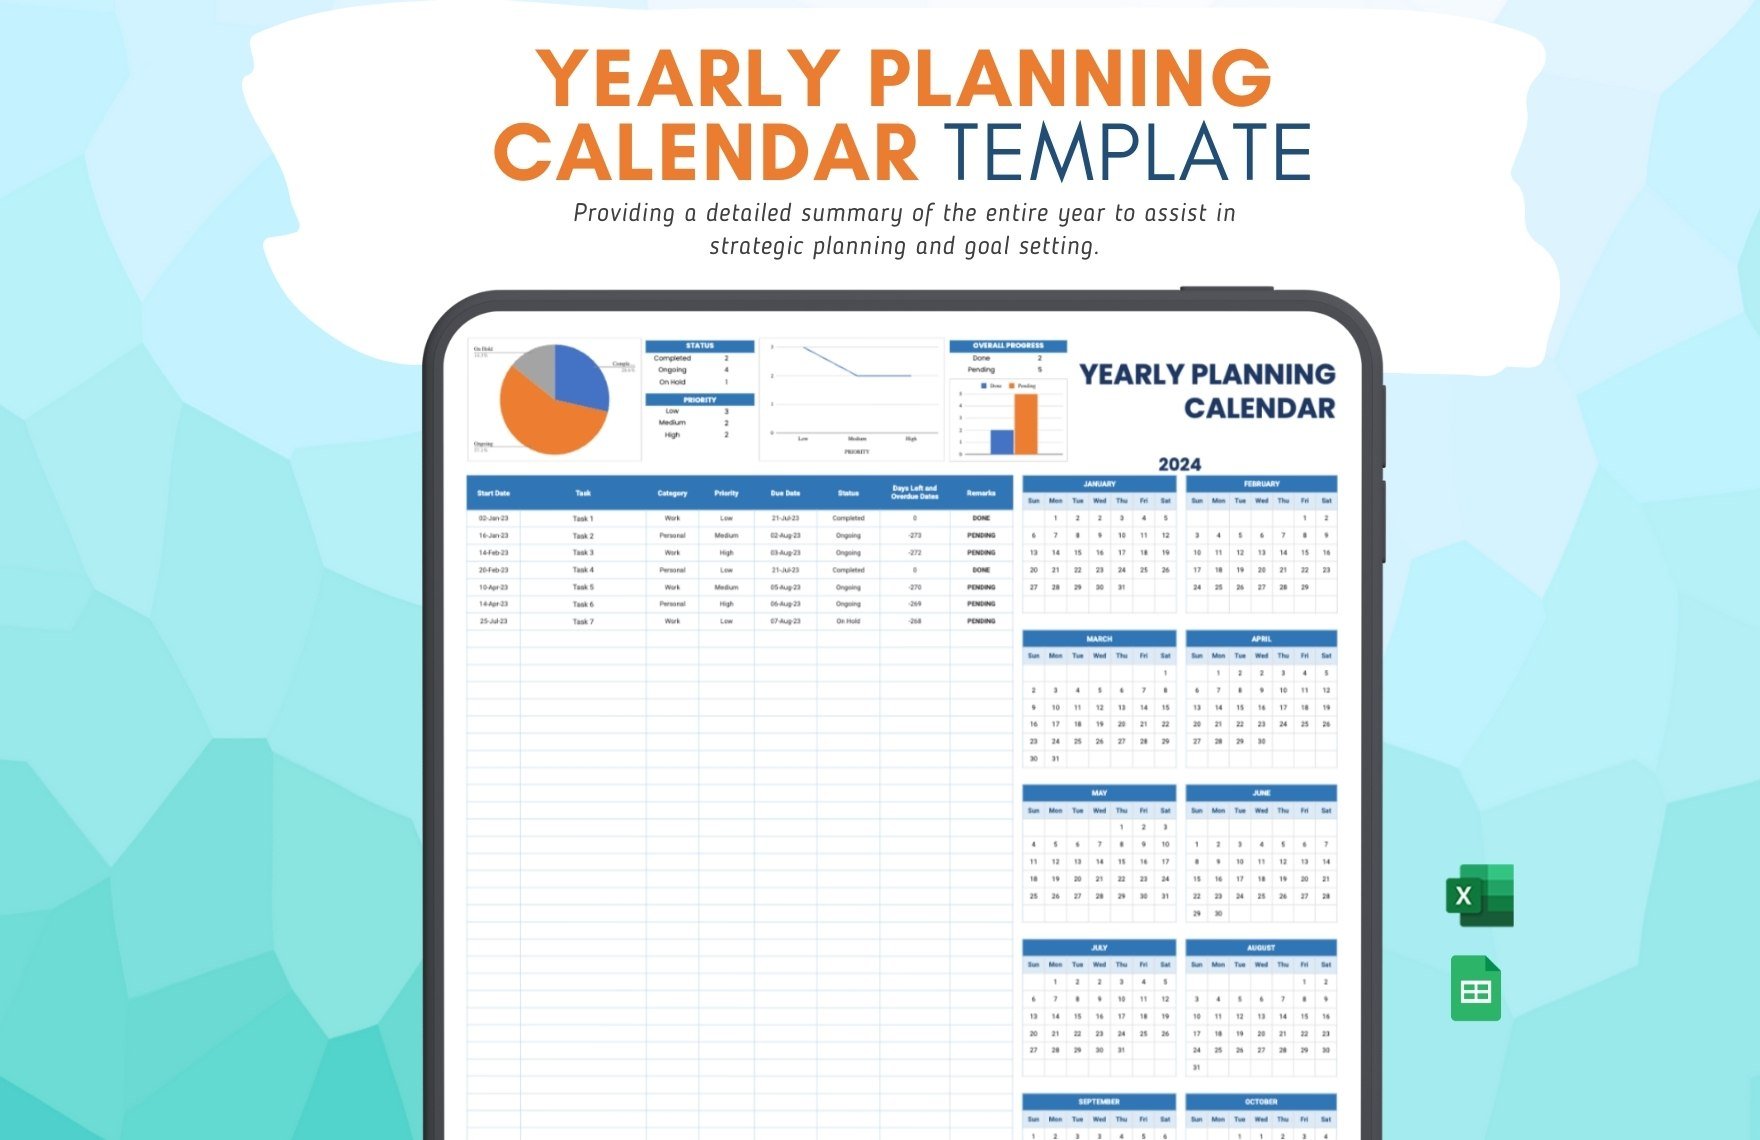 Yearly Planning Calendar Template in Excel, Google Sheets